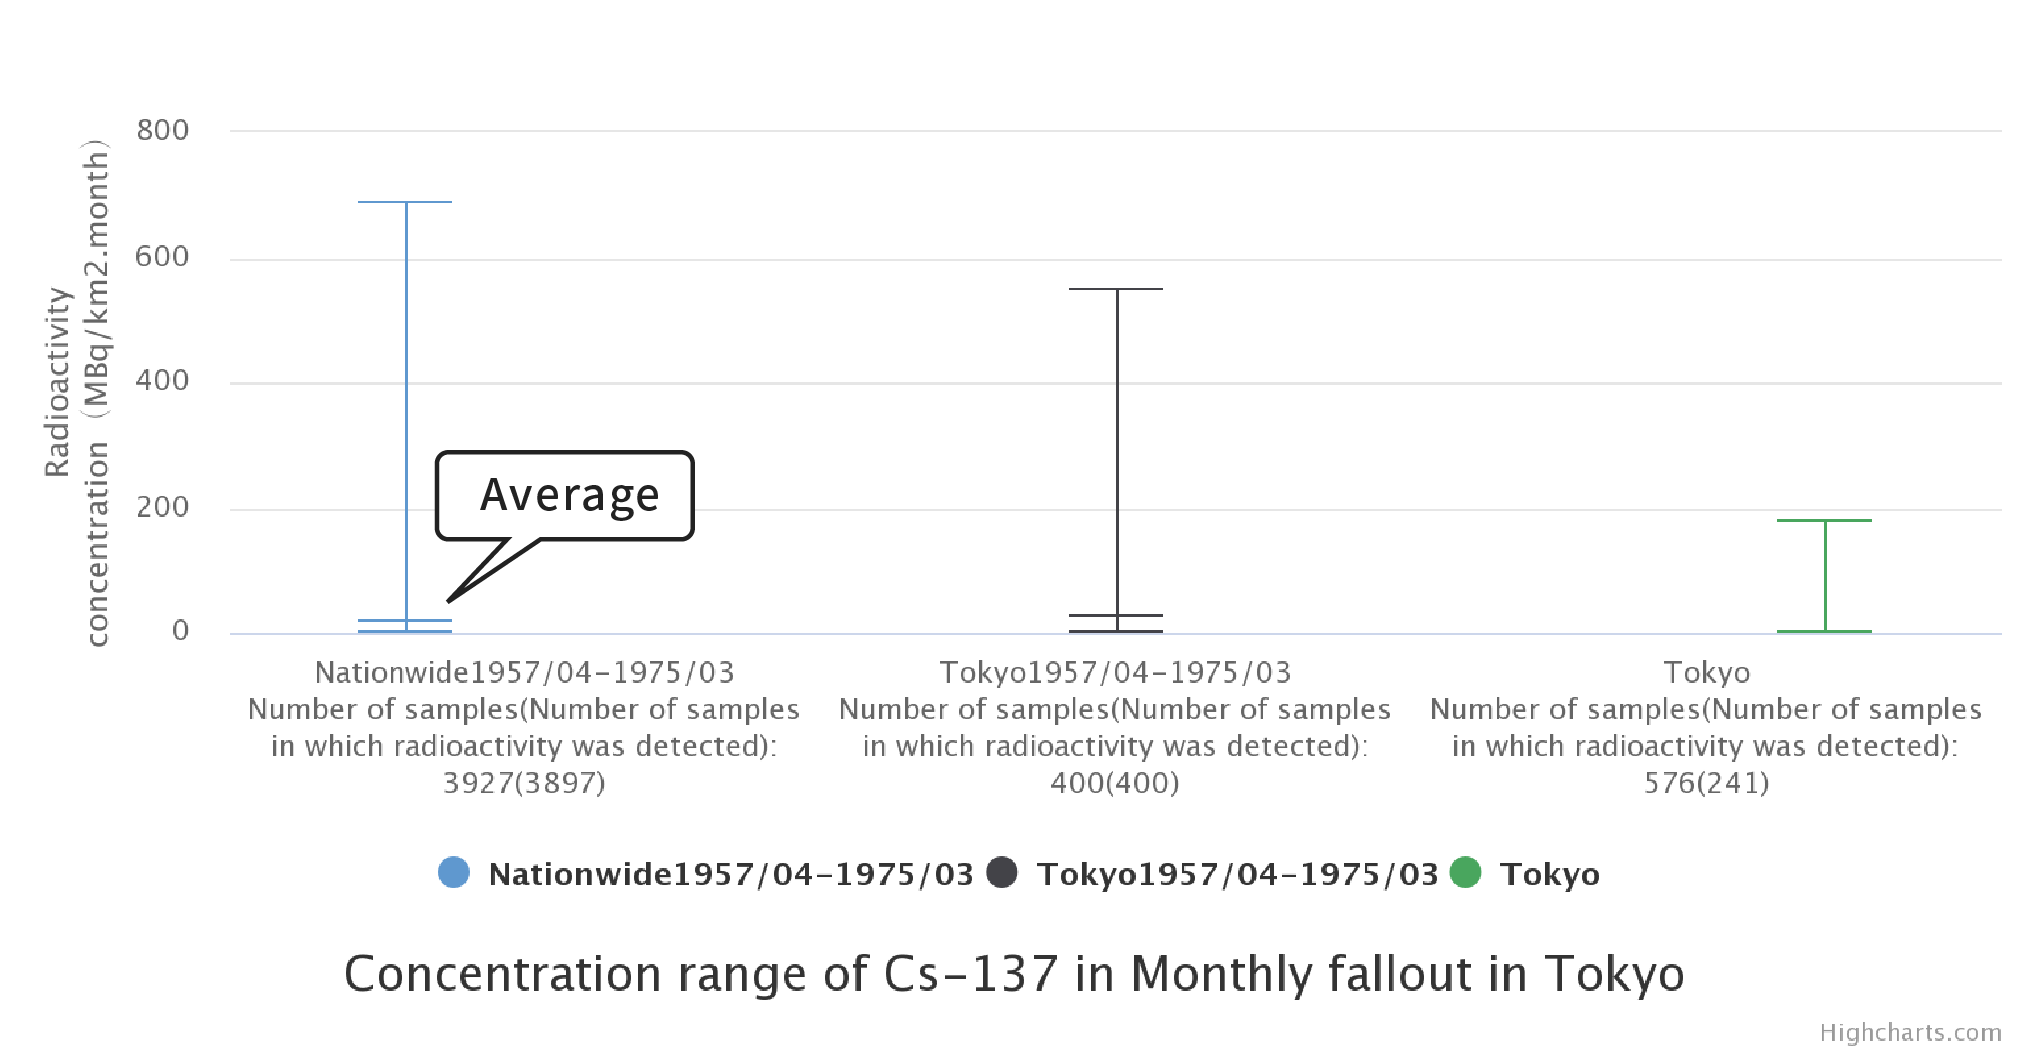 Concentration range of Cs-137 in monthly fallout in Tokyo